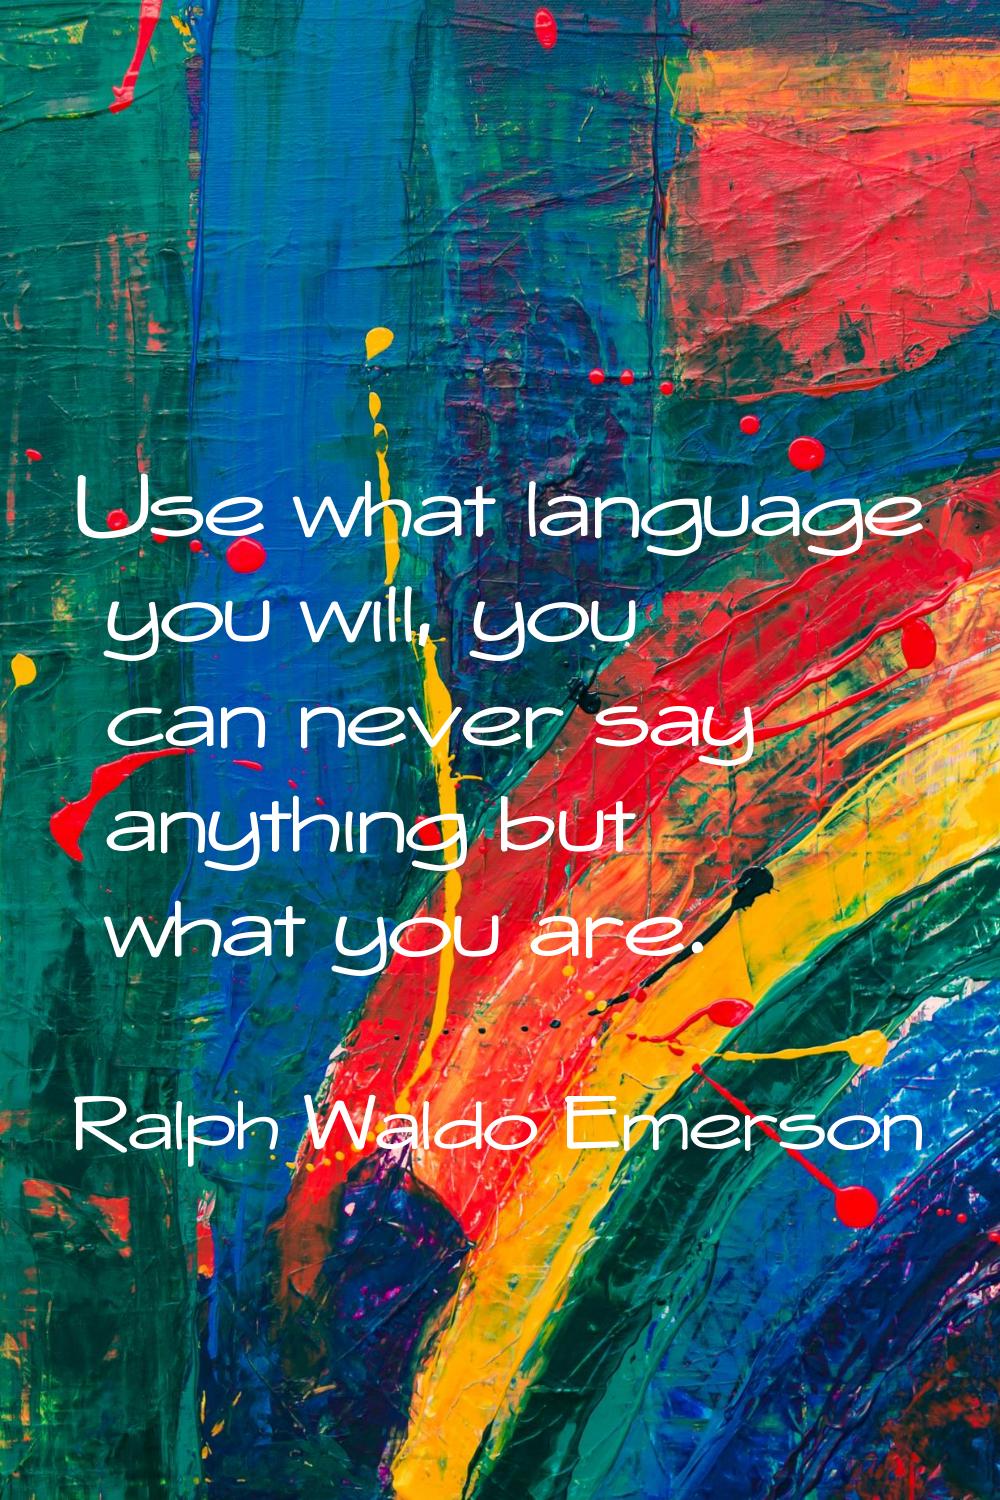 Use what language you will, you can never say anything but what you are.